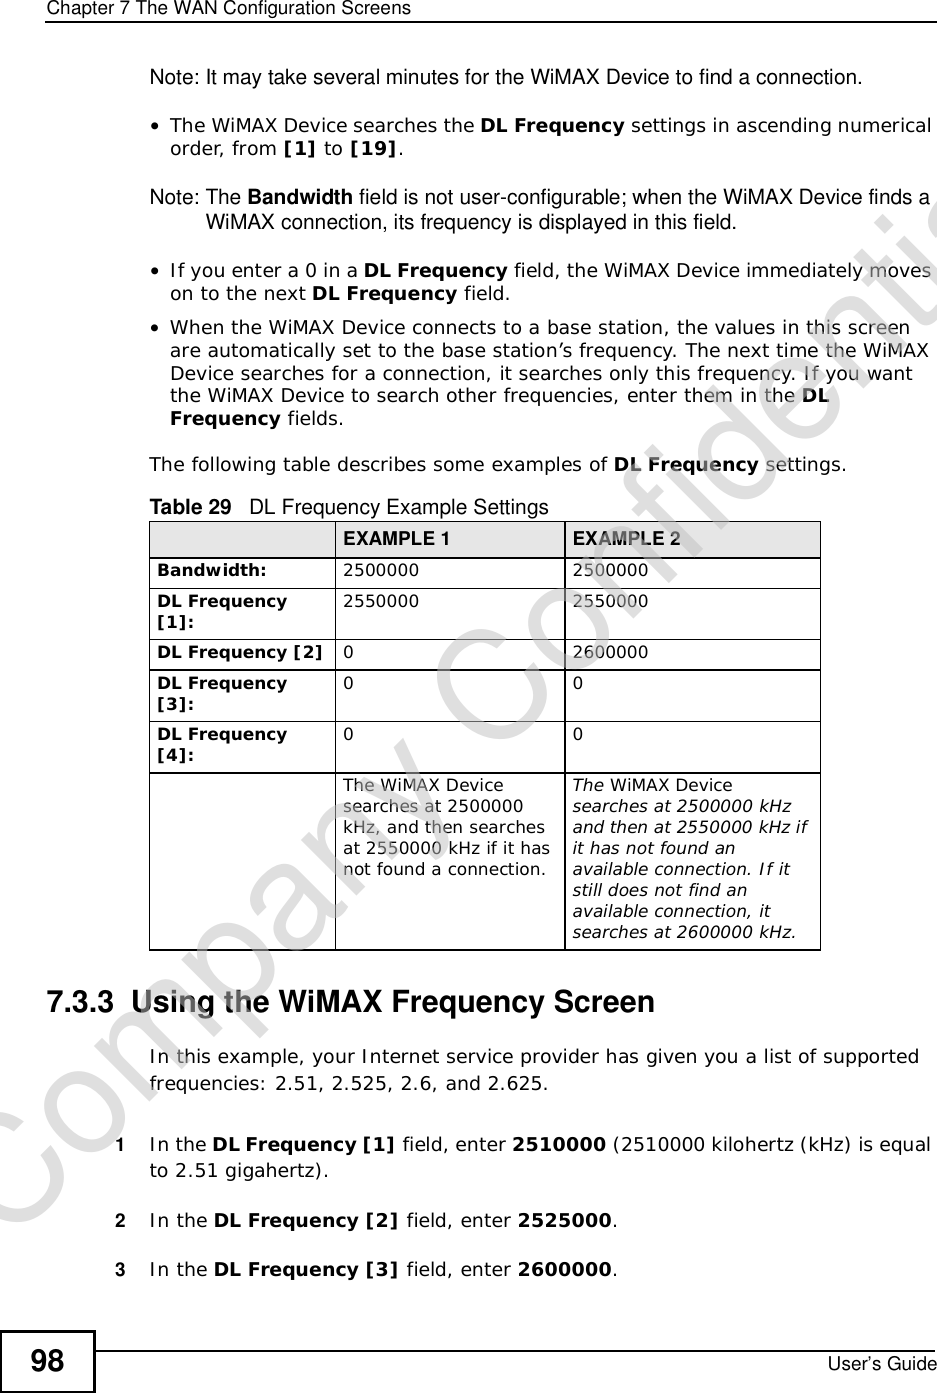 Chapter 7The WAN Configuration ScreensUser’s Guide98Note: It may take several minutes for the WiMAX Device to find a connection.•The WiMAX Device searches the DL Frequency settings in ascending numerical order, from [1] to [19].Note: The Bandwidth field is not user-configurable; when the WiMAX Device finds a WiMAX connection, its frequency is displayed in this field.•If you enter a 0 in a DL Frequency field, the WiMAX Device immediately moves on to the next DL Frequency field.•When the WiMAX Device connects to a base station, the values in this screen are automatically set to the base station’s frequency. The next time the WiMAX Device searches for a connection, it searches only this frequency. If you want the WiMAX Device to search other frequencies, enter them in the DLFrequency fields.The following table describes some examples of DL Frequency settings.7.3.3  Using the WiMAX Frequency ScreenIn this example, your Internet service provider has given you a list of supported frequencies: 2.51, 2.525, 2.6, and 2.625. 1In the DL Frequency [1] field, enter 2510000 (2510000 kilohertz (kHz) is equal to 2.51 gigahertz).2In the DL Frequency [2] field, enter 2525000.3In the DL Frequency [3] field, enter 2600000.Table 29   DL Frequency Example SettingsEXAMPLE 1 EXAMPLE 2Bandwidth: 25000002500000DL Frequency [1]: 25500002550000DL Frequency [2] 02600000DL Frequency [3]: 00DL Frequency [4]: 00The WiMAX Device searches at 2500000 kHz, and then searches at 2550000 kHz if it has not found a connection.The WiMAX Devicesearches at 2500000 kHz and then at 2550000 kHz if it has not found an available connection. If it still does not find an available connection, it searches at 2600000 kHz.Company Confidential